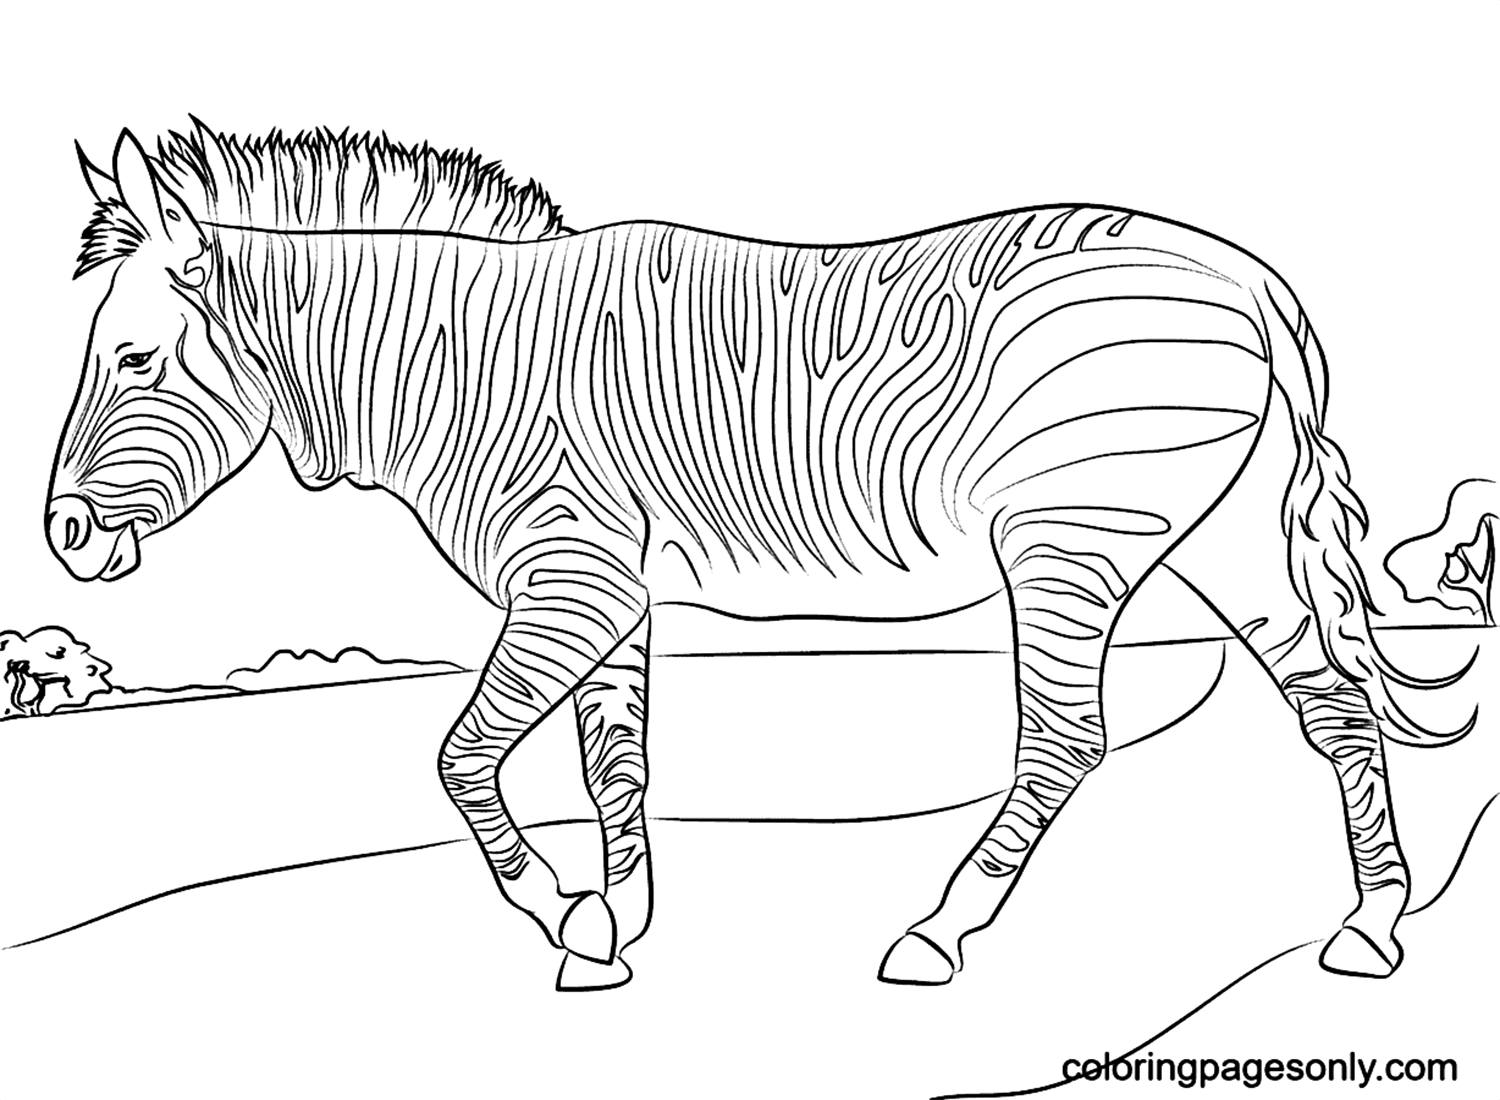 Mountain Zebra Coloring Pages